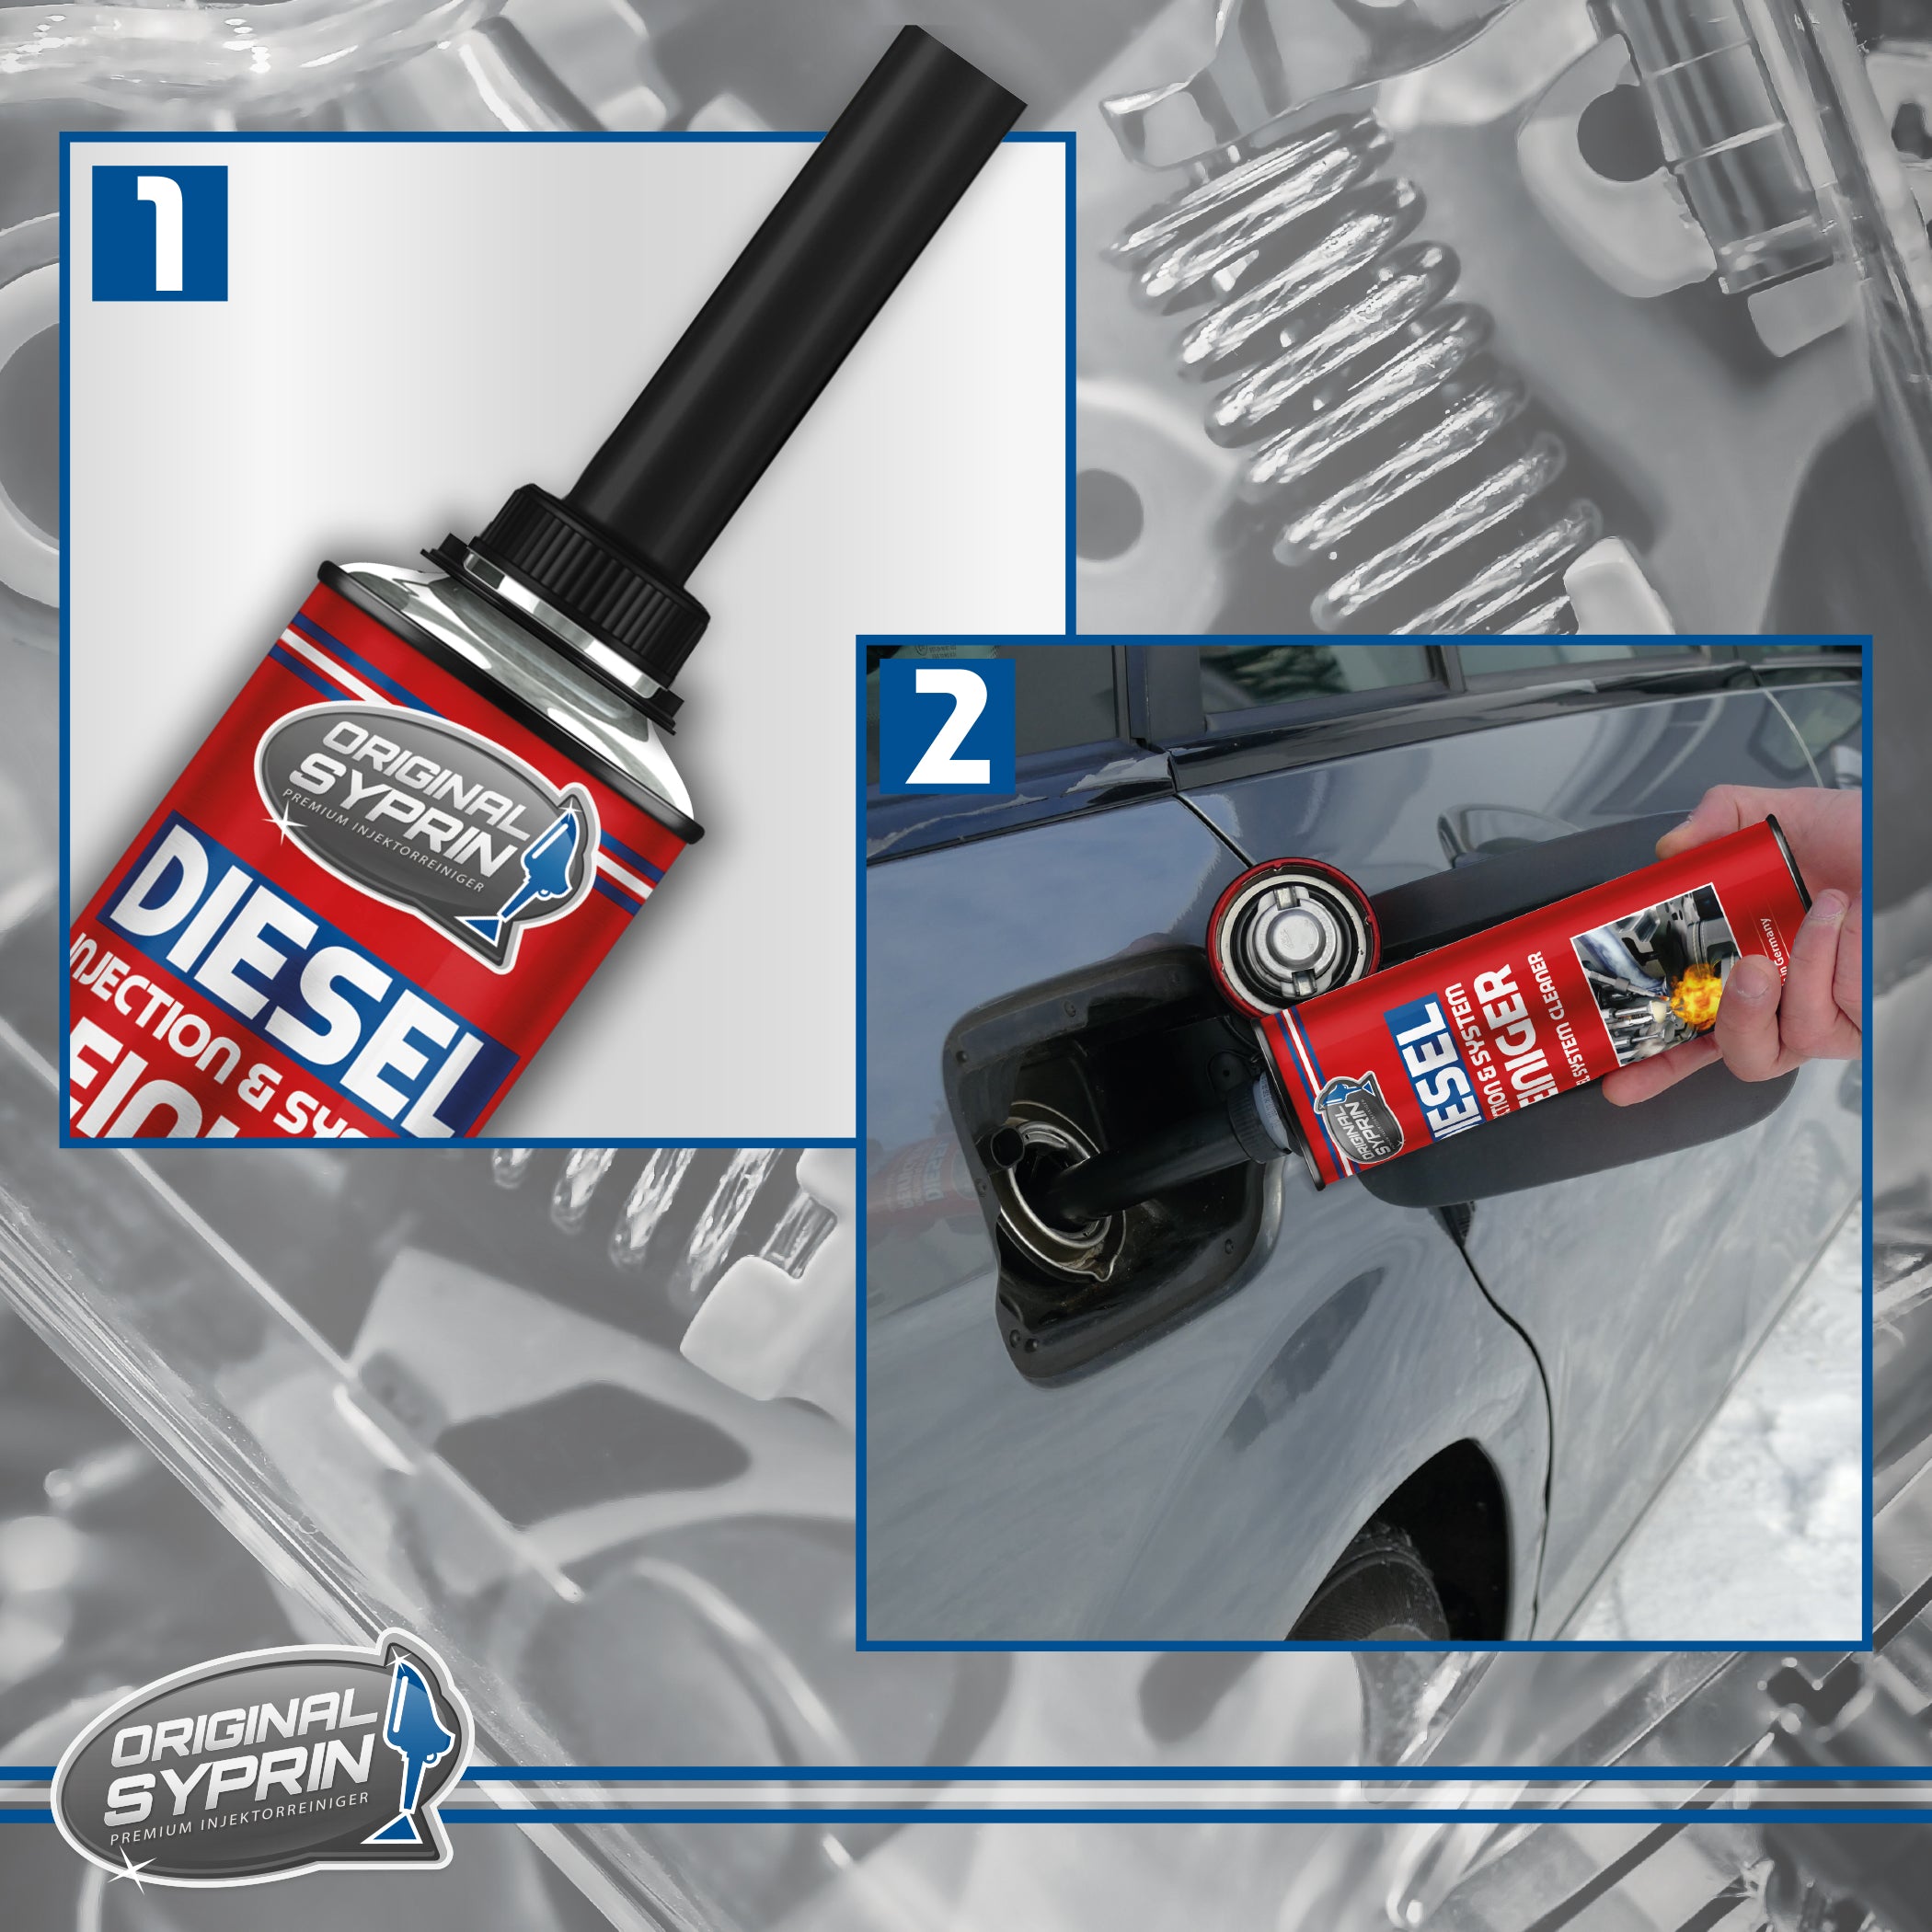 ORIGINAL SYPRIN Diesel All-Year Set - Cleaner additive and frost